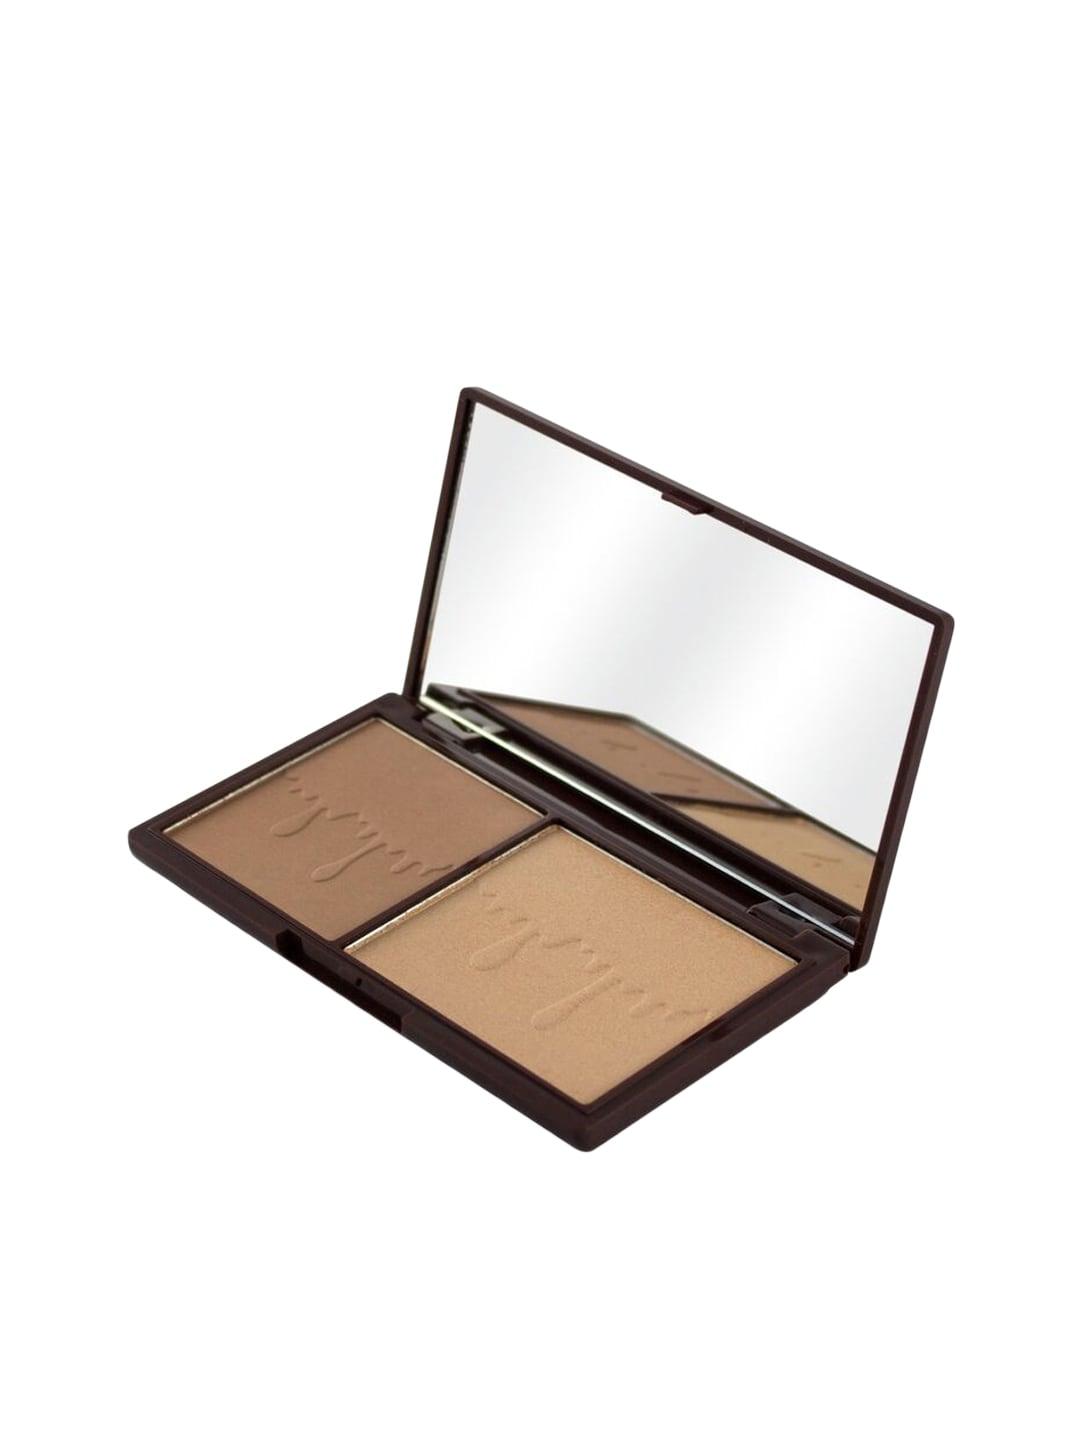 Makeup Revolution London Bronze and Glow I Heart Chocolate Highlighter